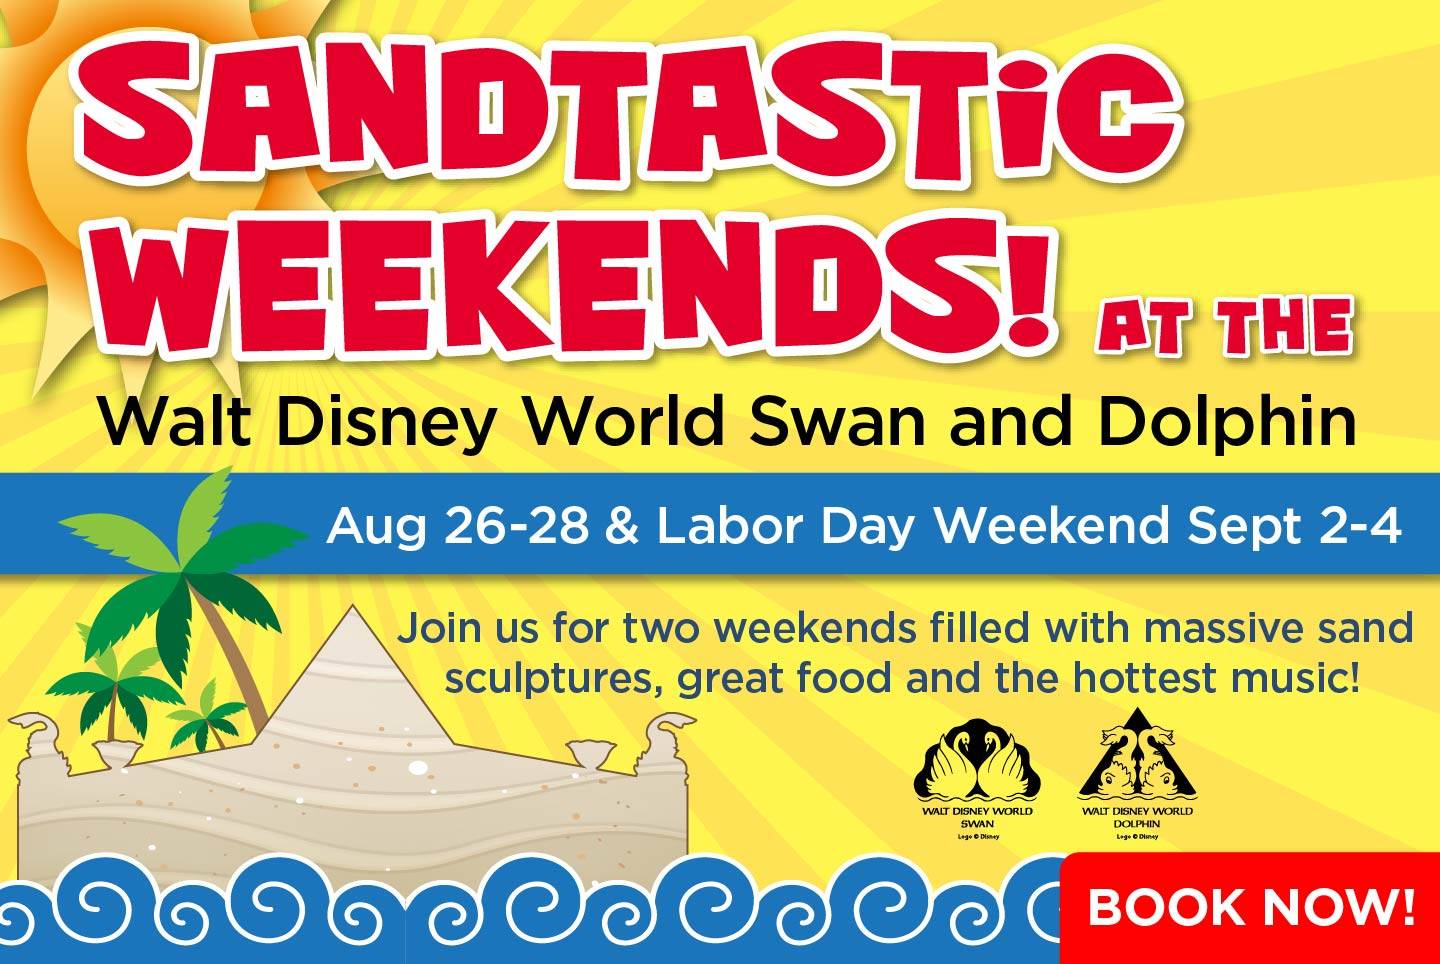 Sandtastic Weekends coming to the Walt Disney World Swan and Dolphin later this summer